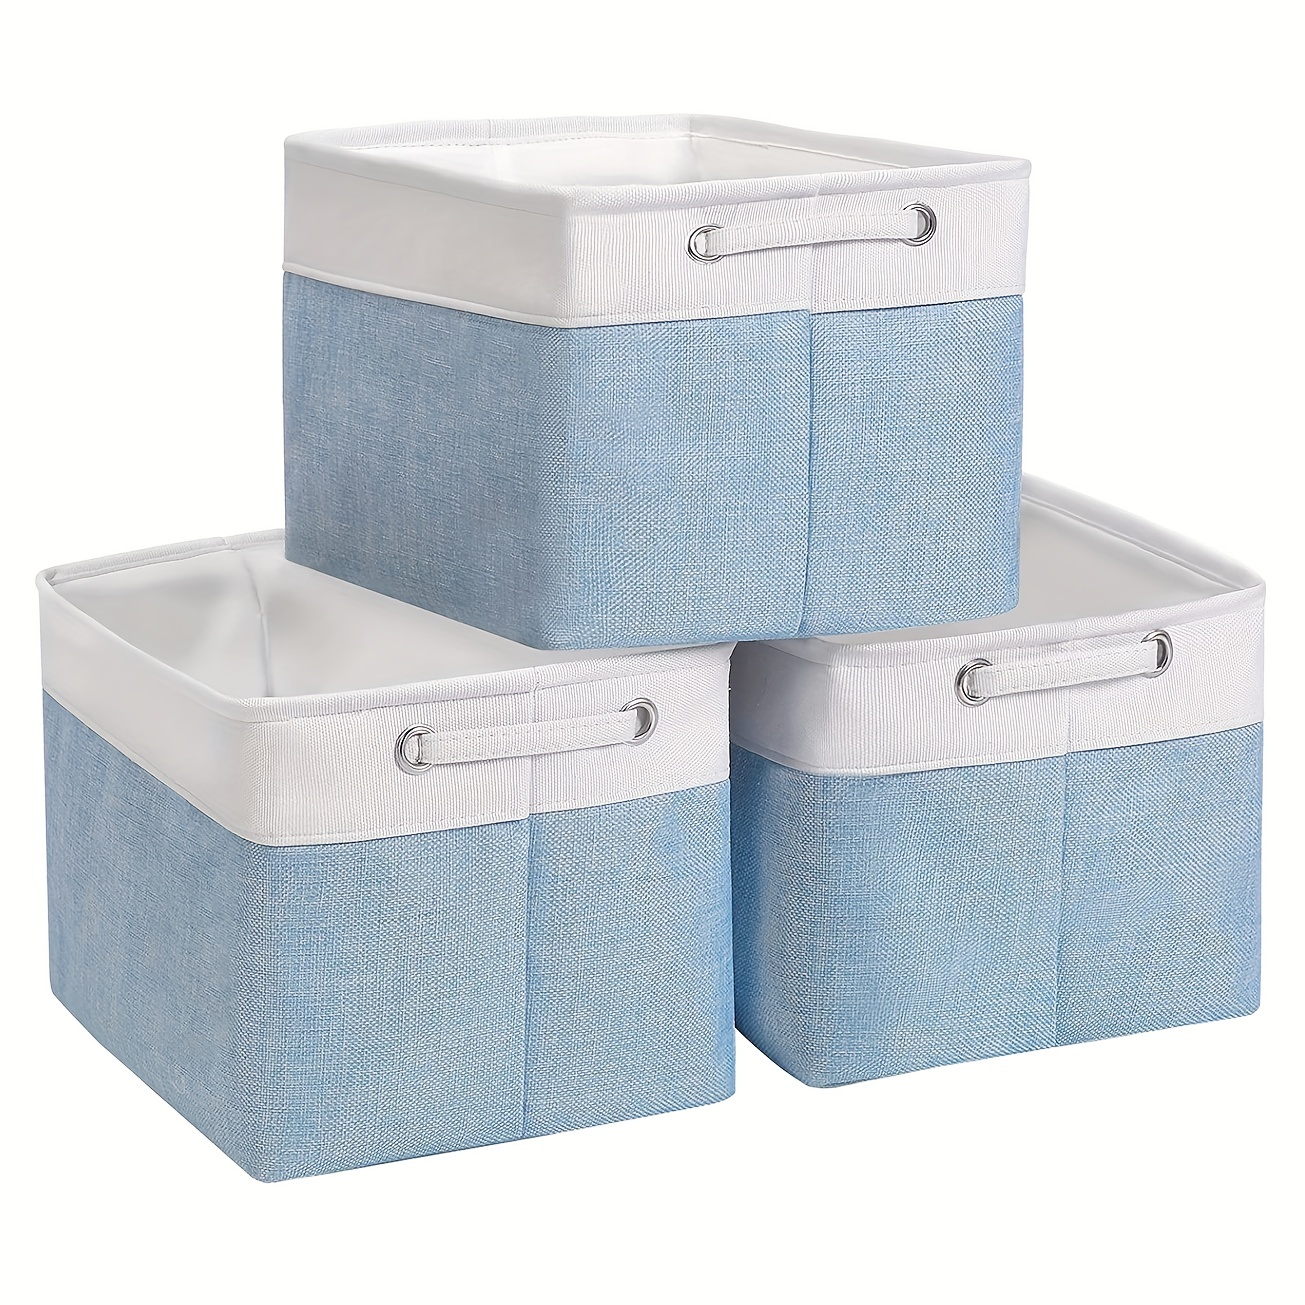 3 Pack/Set Plastic Storage Box with Lid,Waterproof Collapsible Storage Bins  for Toys/Shoes/Clothes/Office Teal Color